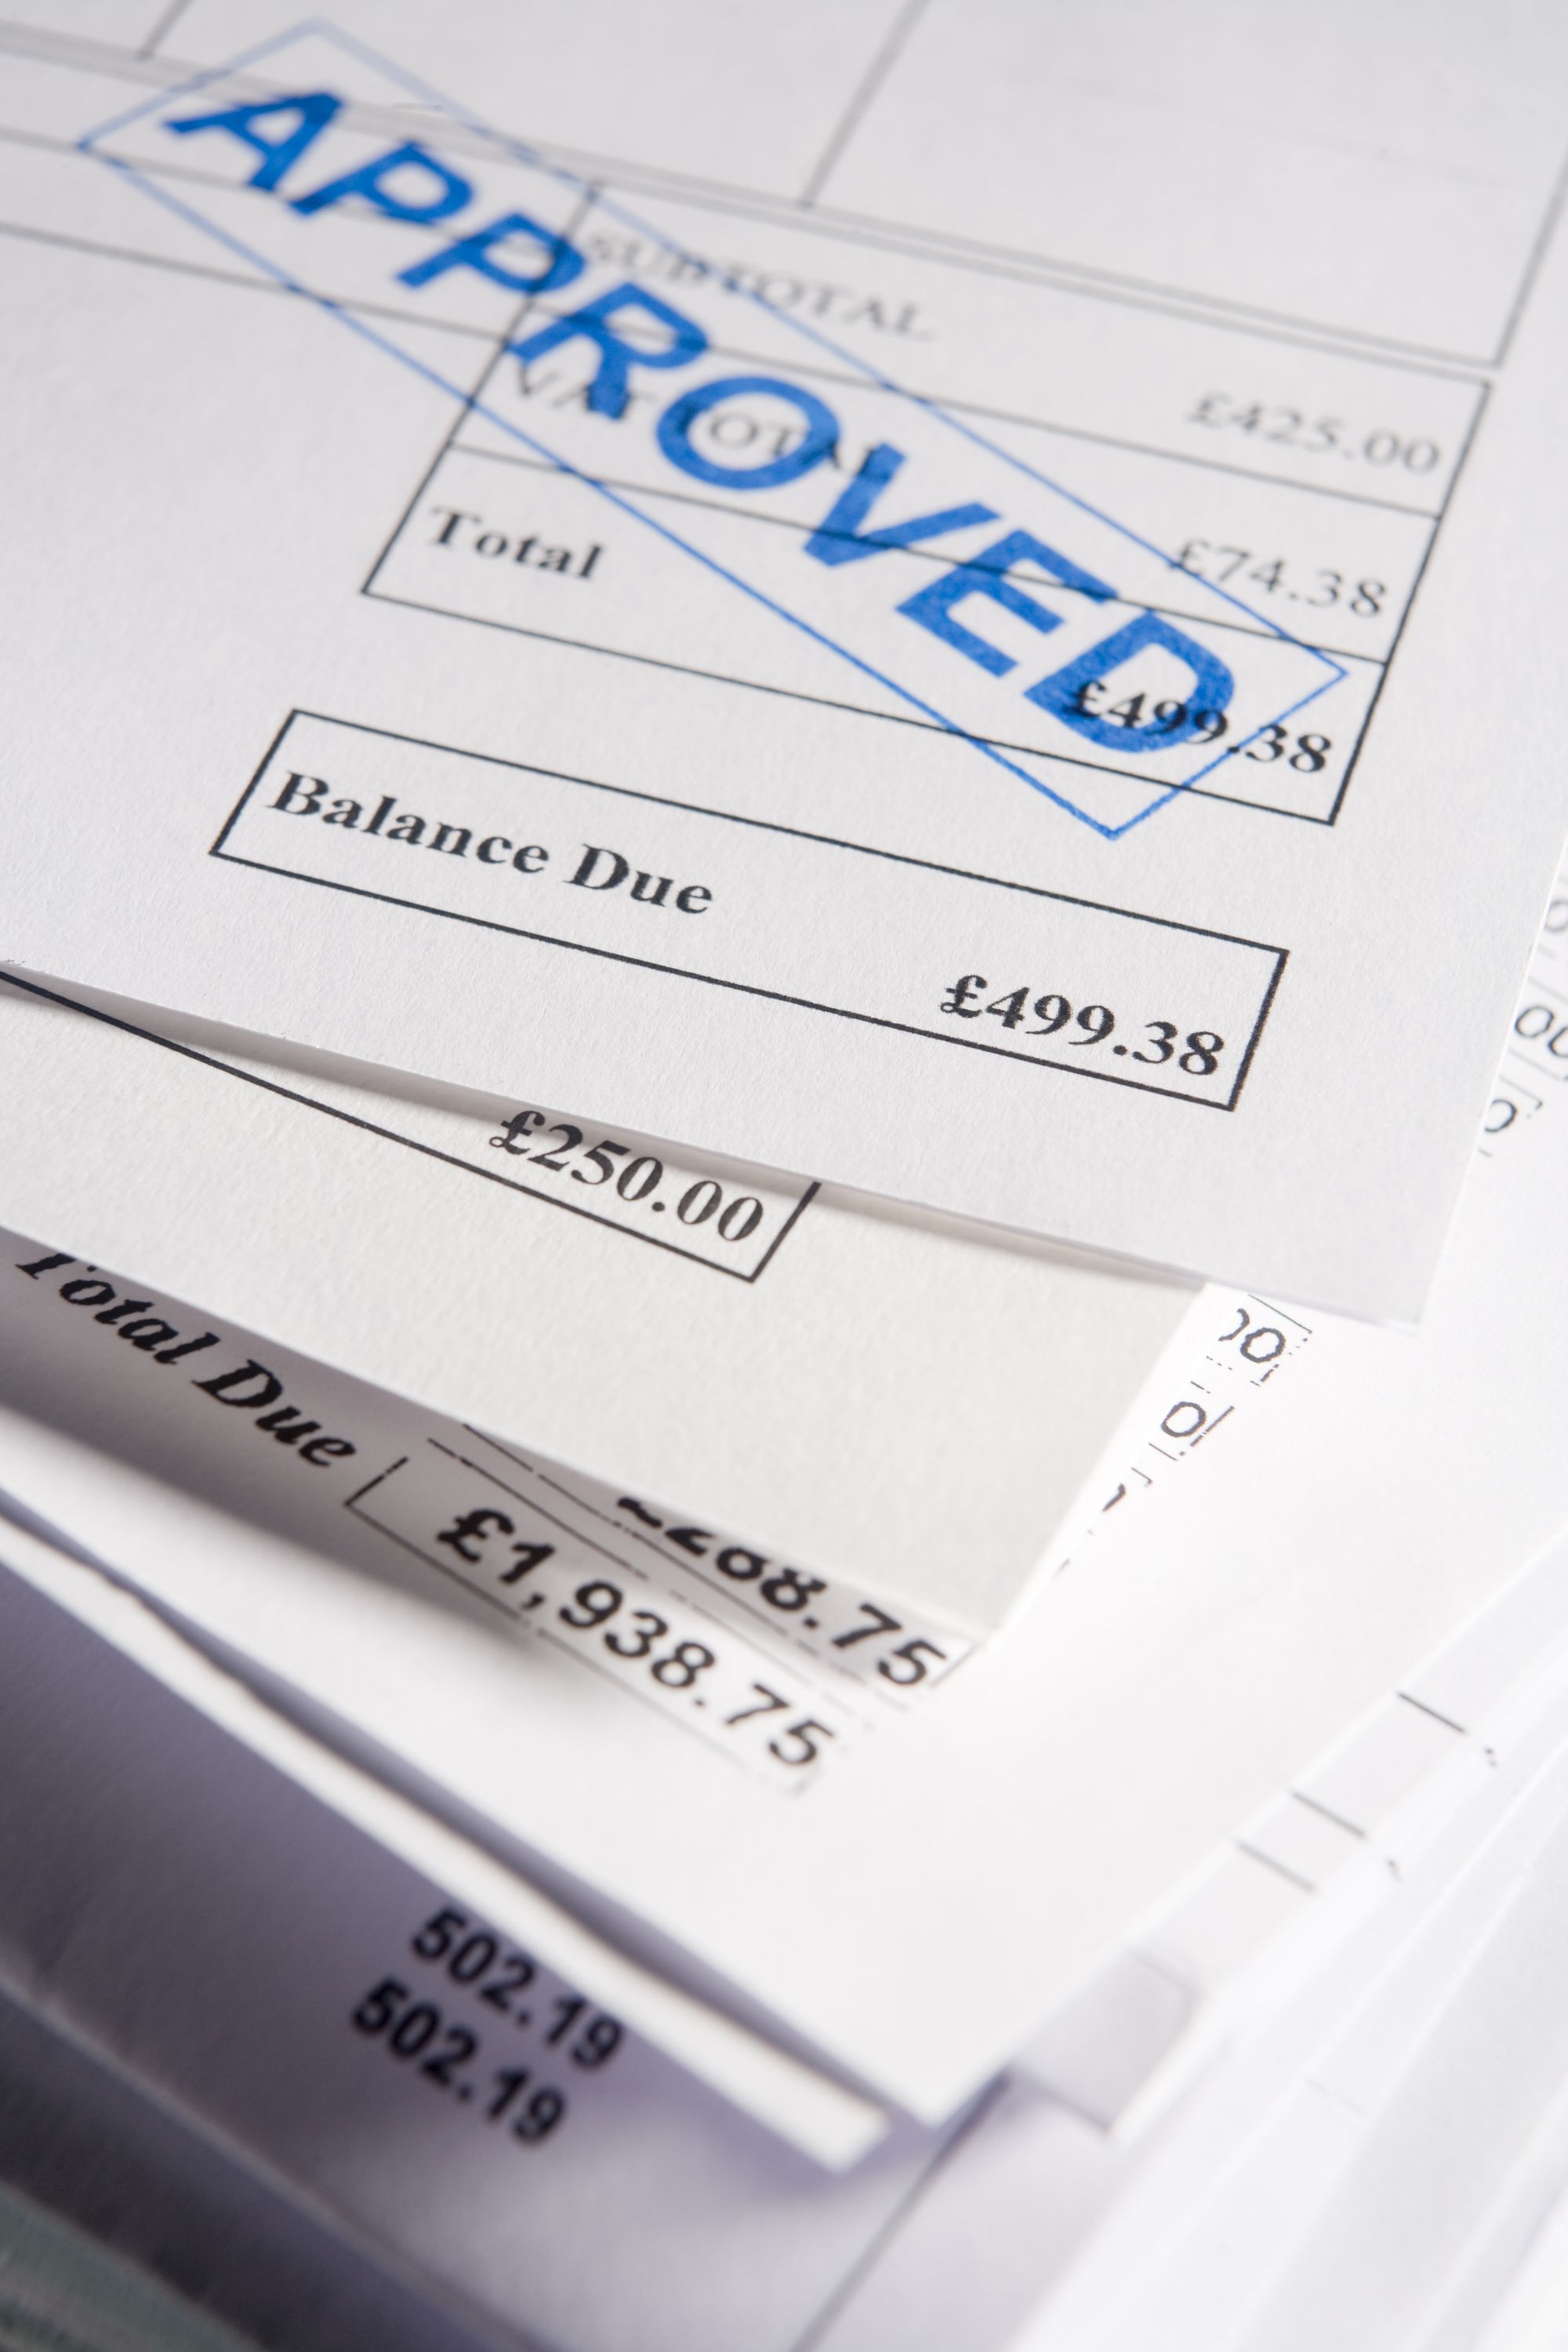 Invoice Approval - Approved Invoices